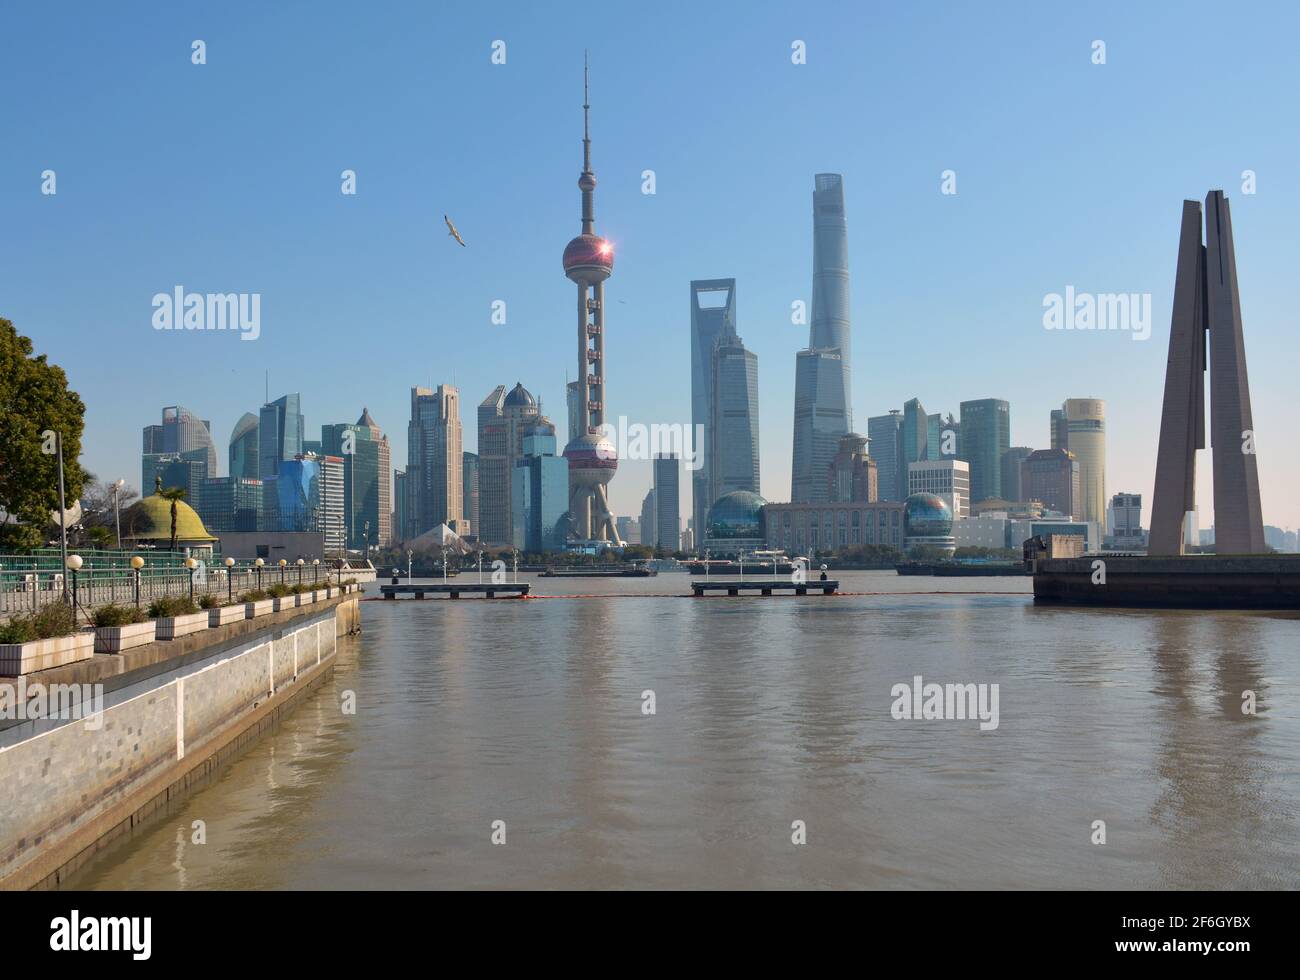 Wide angle view of the famous pudong skyline in Shanghai taken from the Waibaidu bridge. Stock Photo